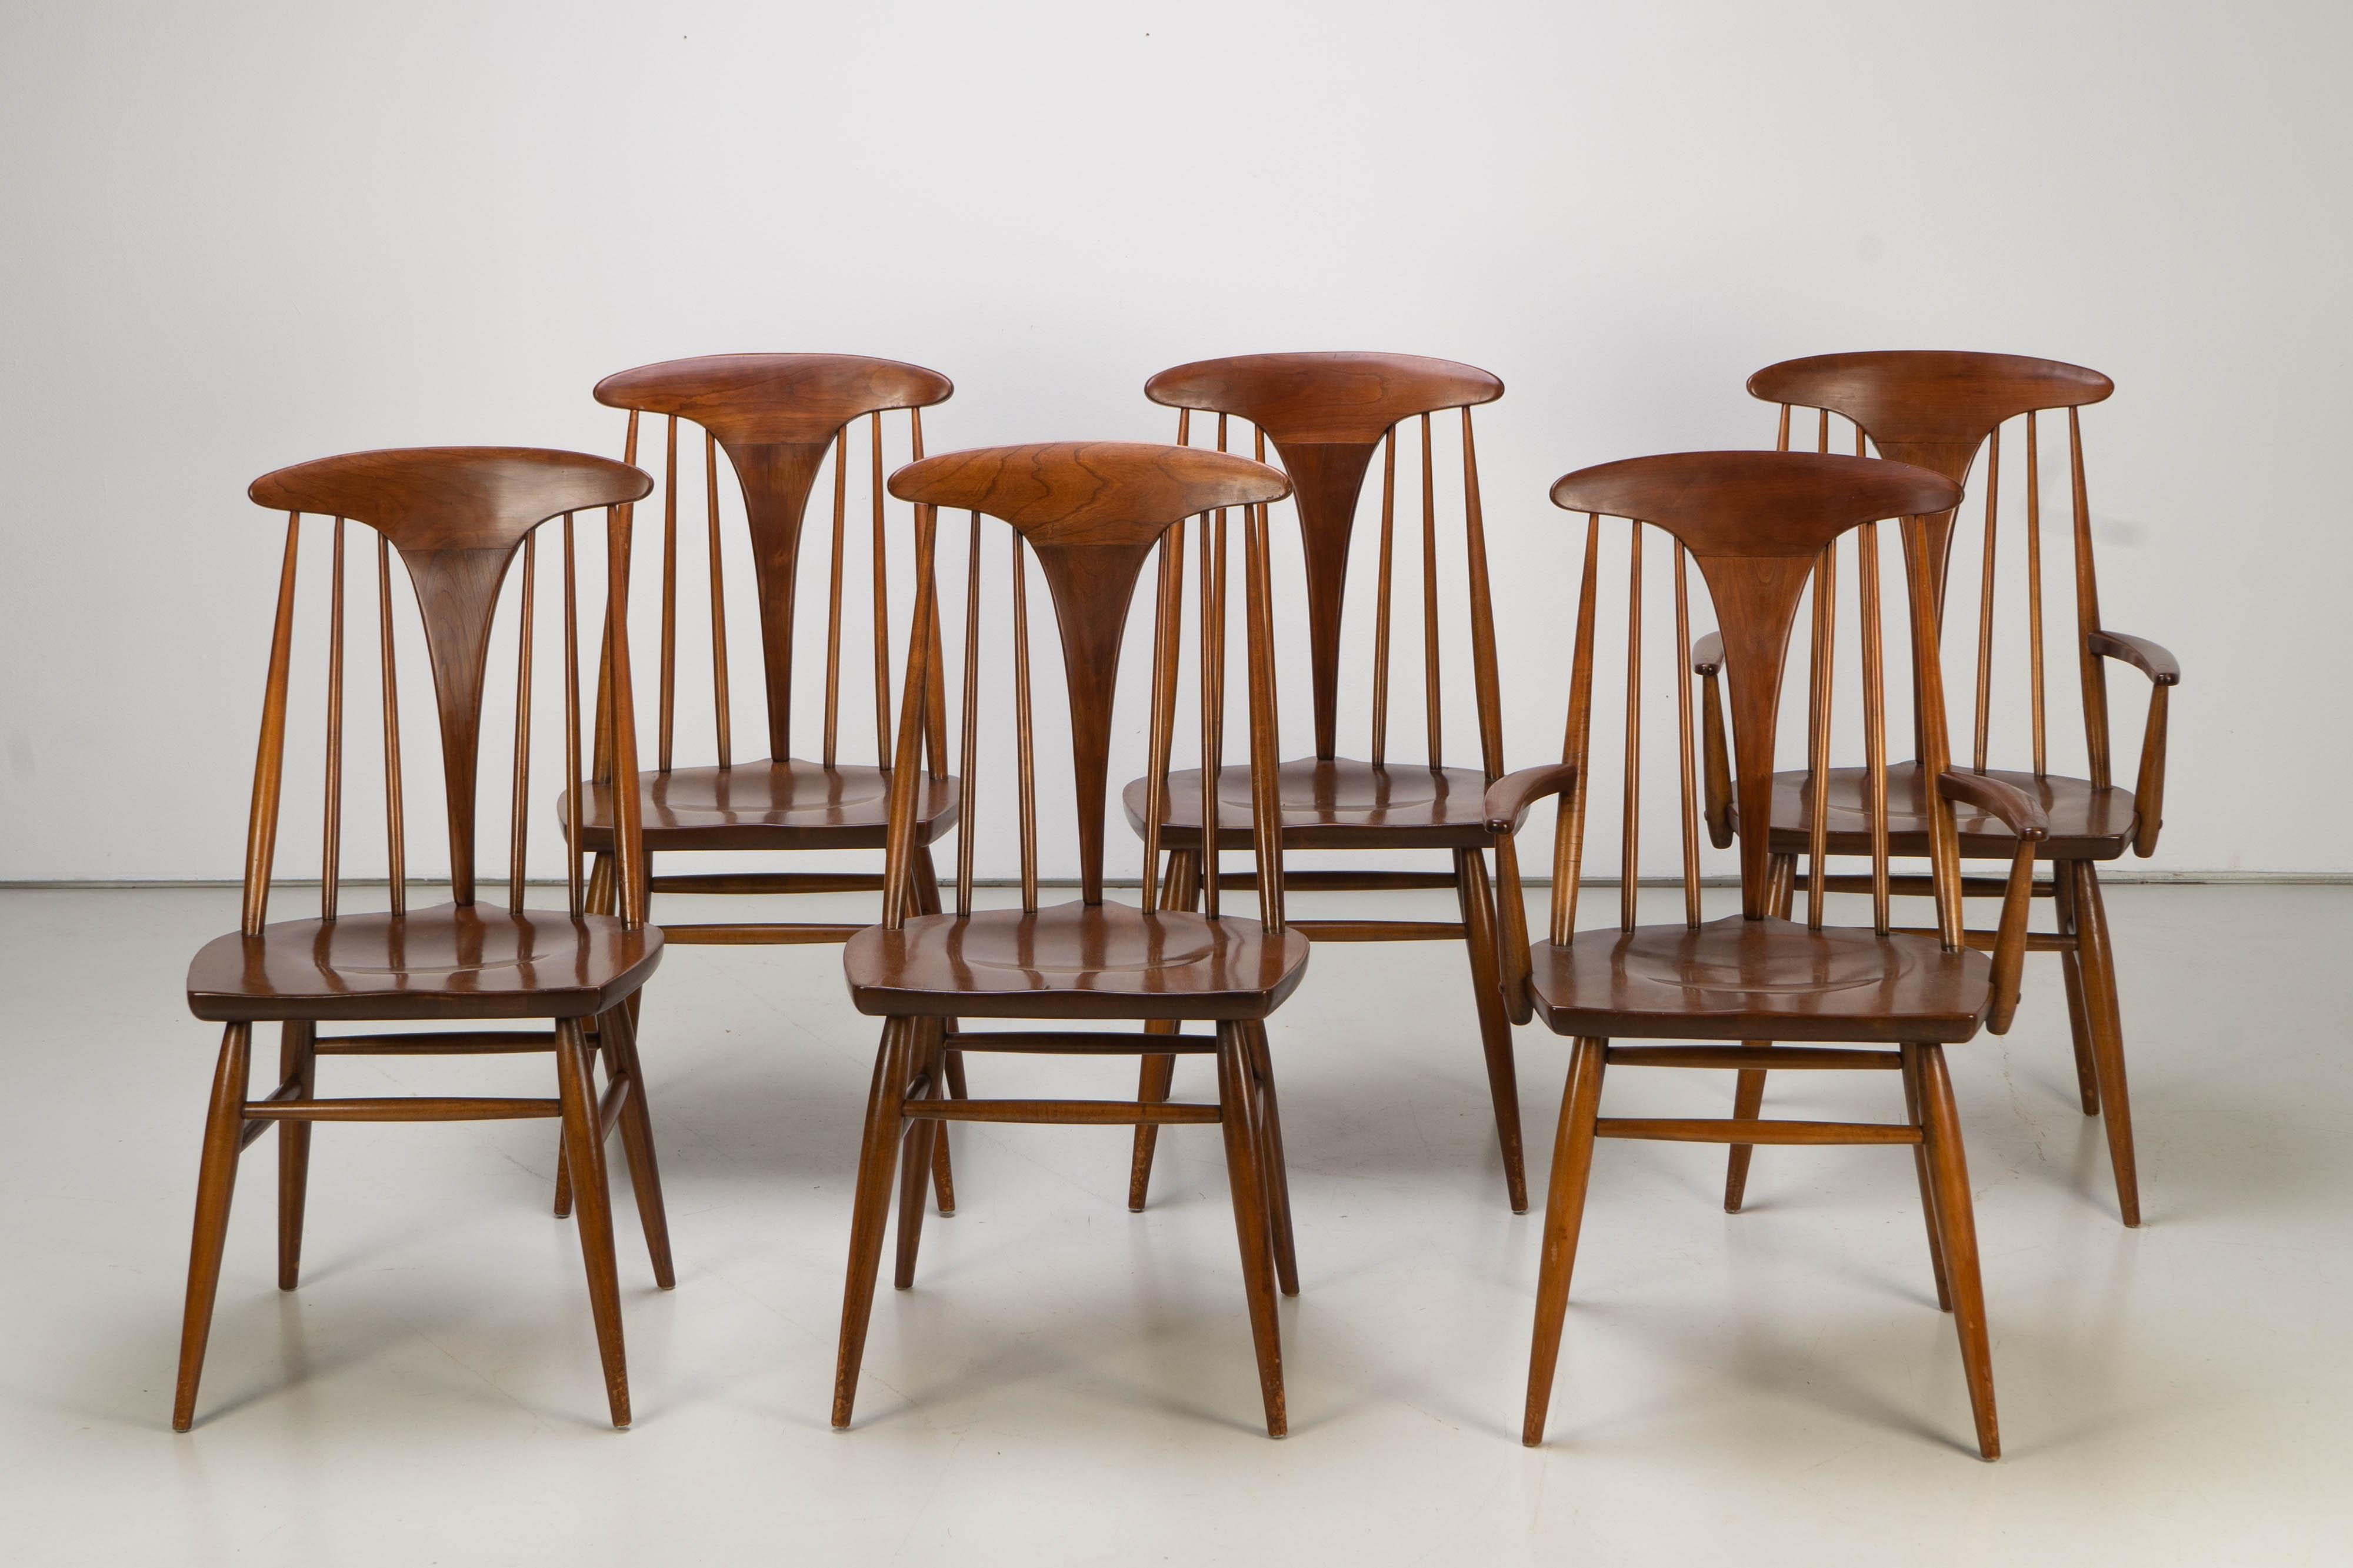 Set of six Mid-Century Modern spindle back chairs manufactured by Heywood Wakefield. The chairs have been made with American walnut, featuring beutiful details. 
Sidechairs are 50 cm wide, arm chairs 58 cm.